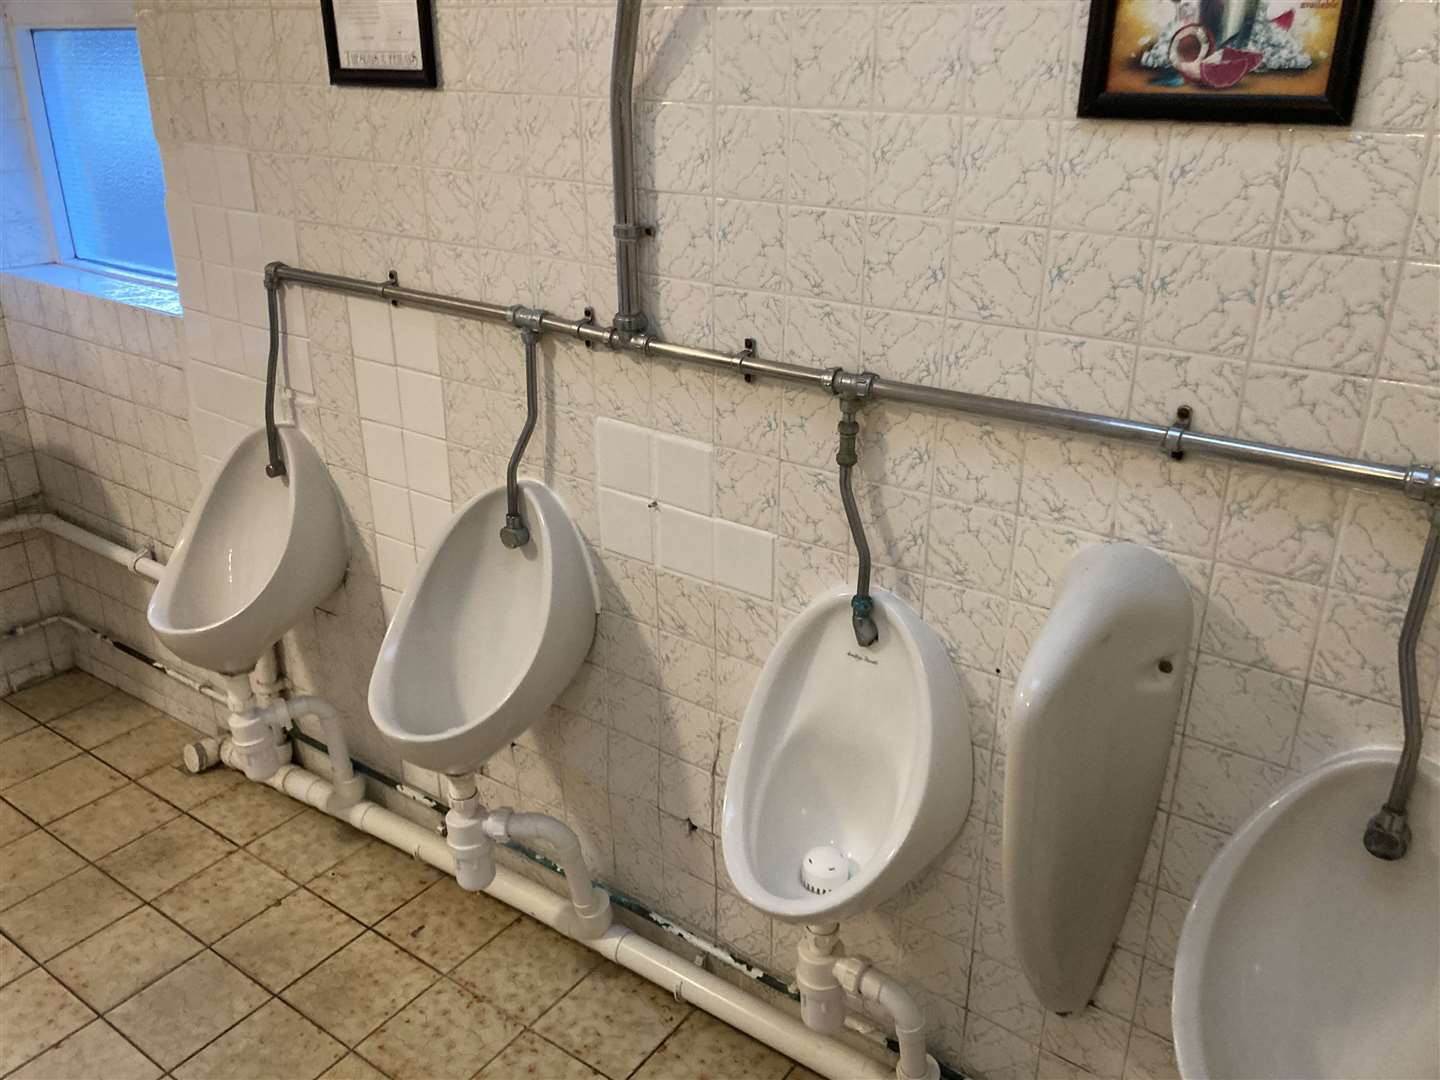 The toilets were clean and airy